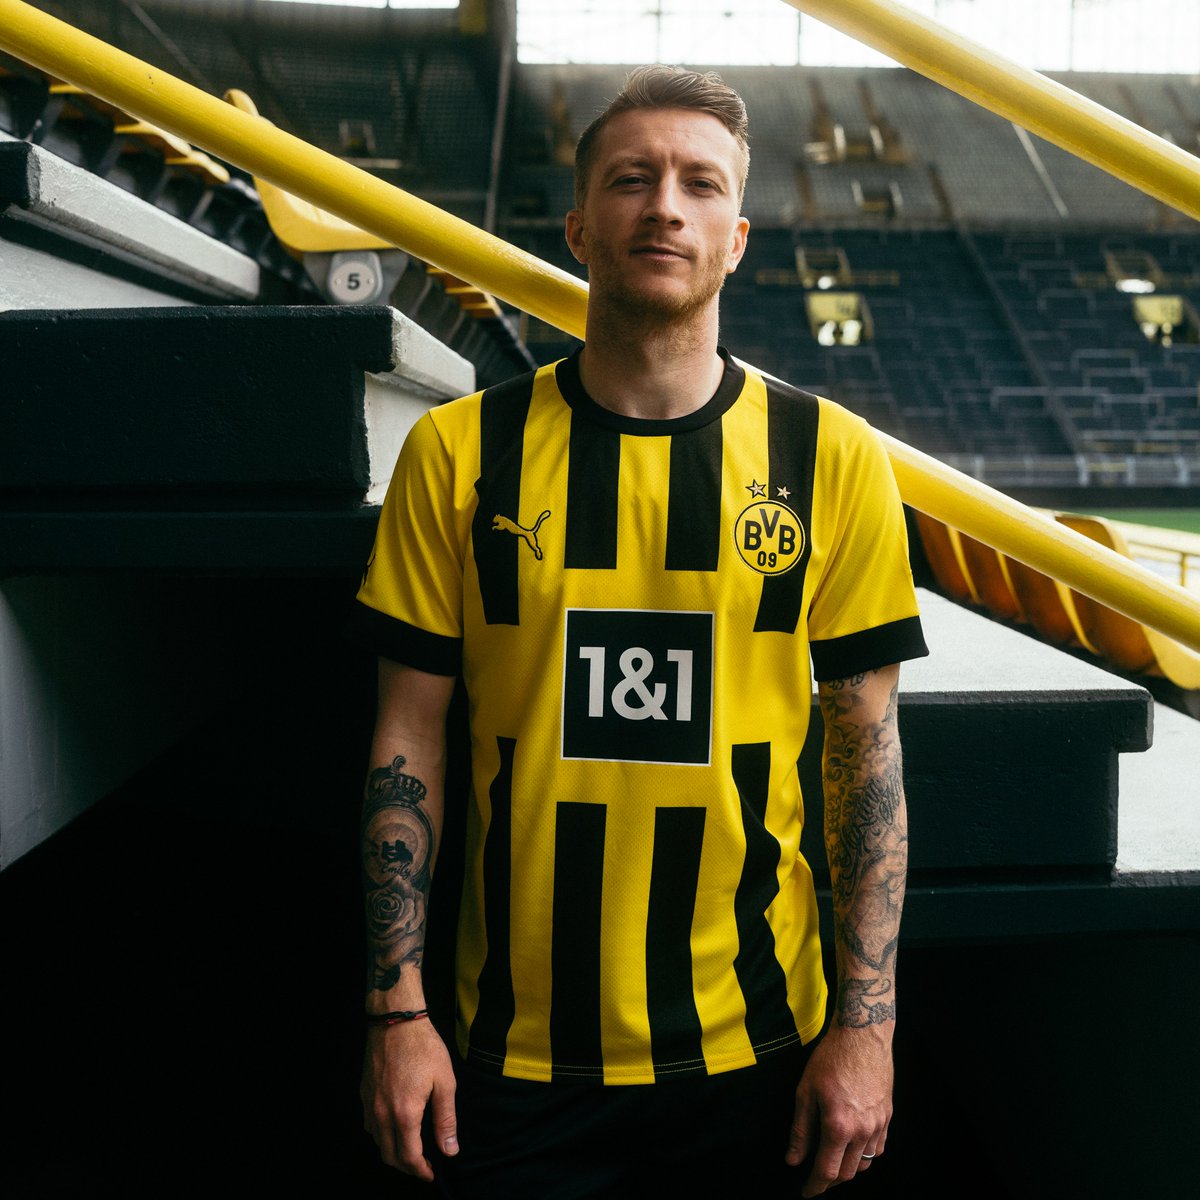 Manchester United Transfers: WATCH Borussia Dortmund legend Marco Reus' agent spotted at OLD Trafford as Premier League club willing to sign out of contract German star, Follow LIVE